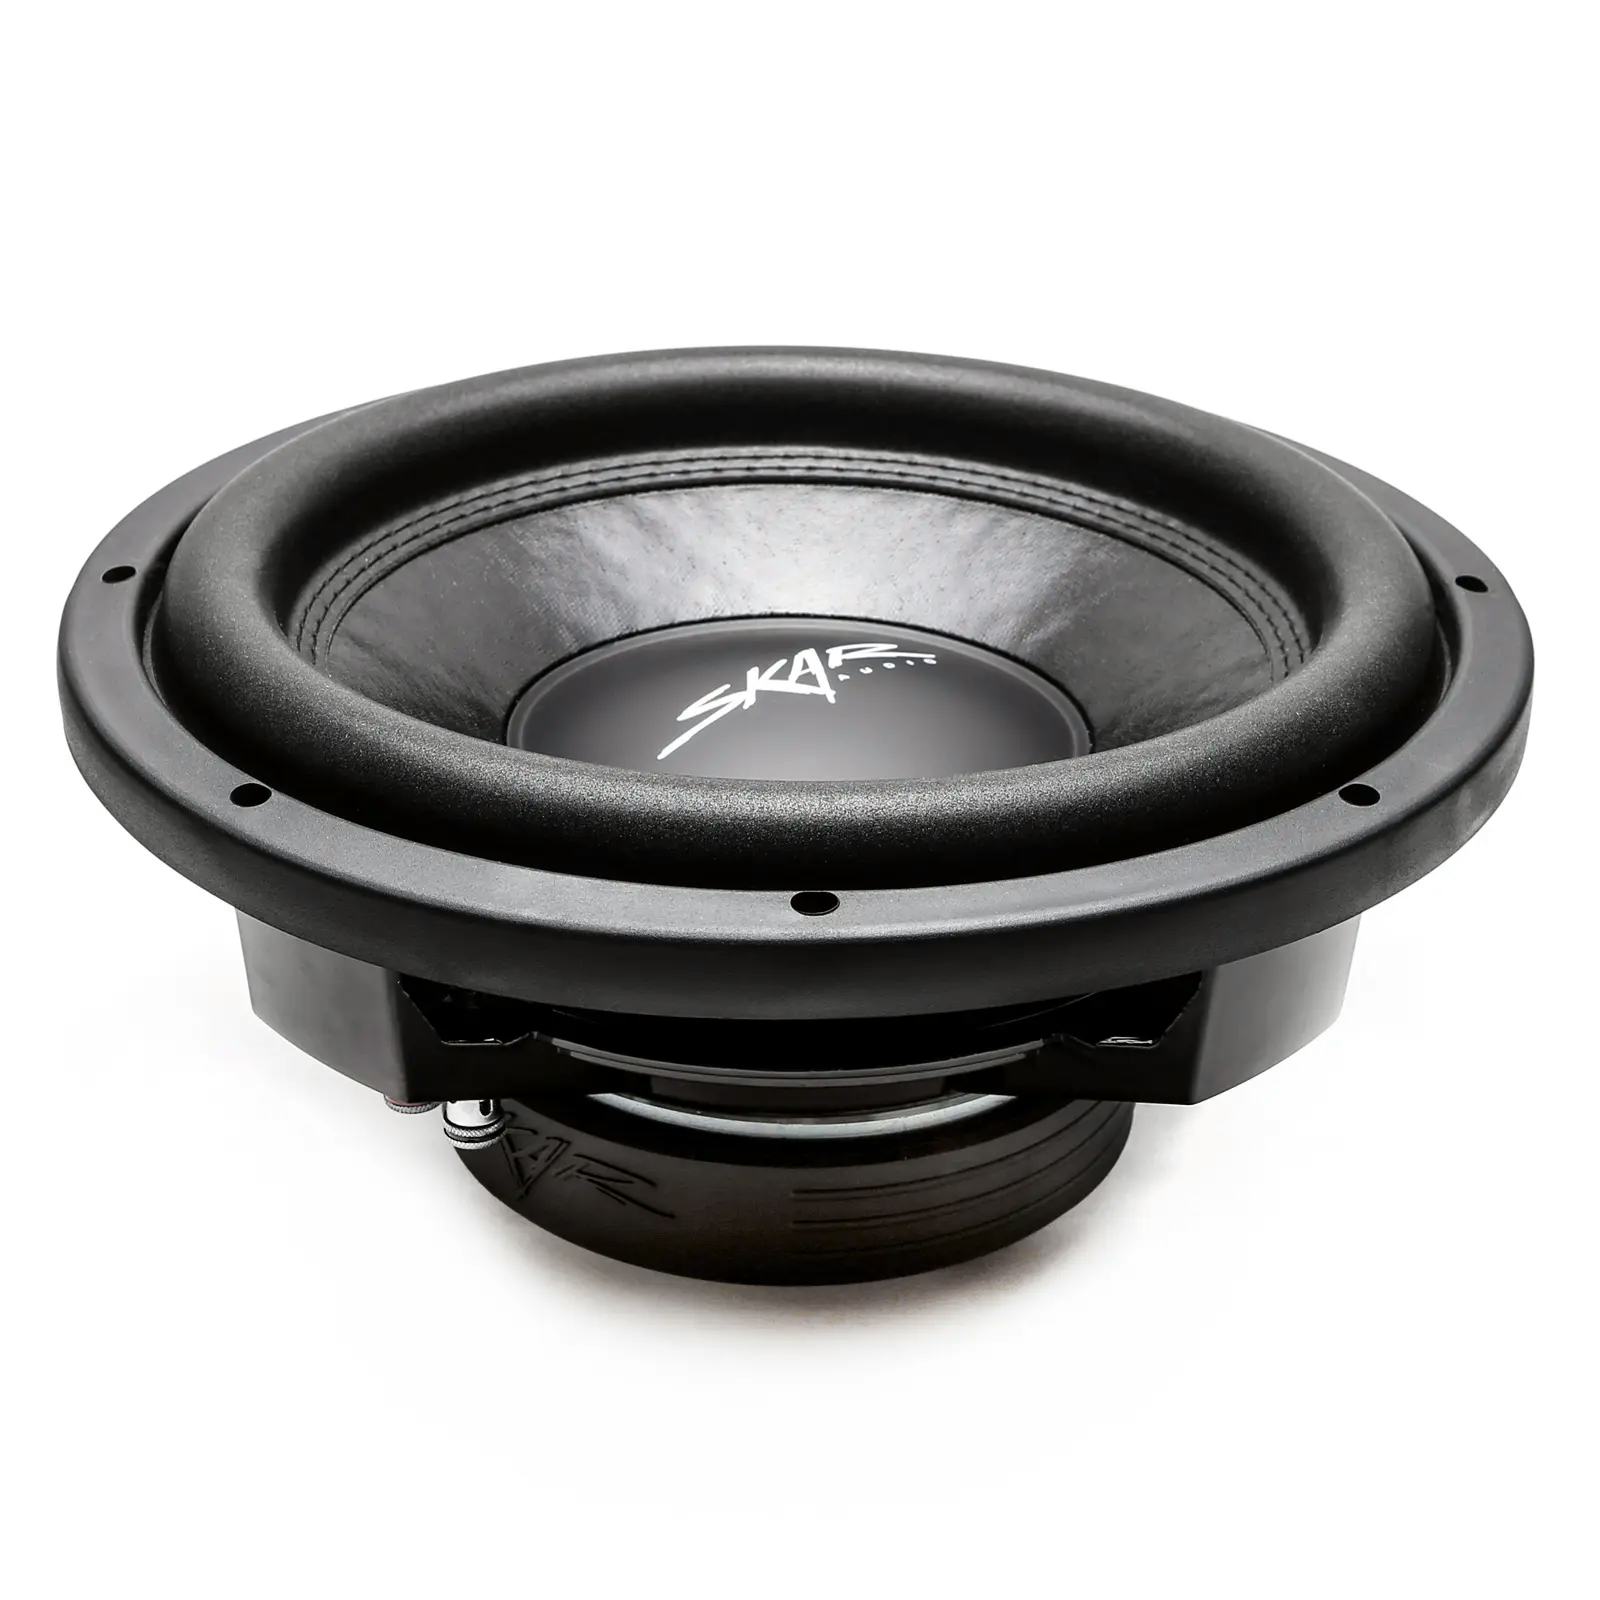 Dual 12" 1,600W Max Power Loaded Subwoofer Enclosure Compatible with 1999-2006 Chevrolet Silverado/GMC Sierra Extended Cab Trucks #7